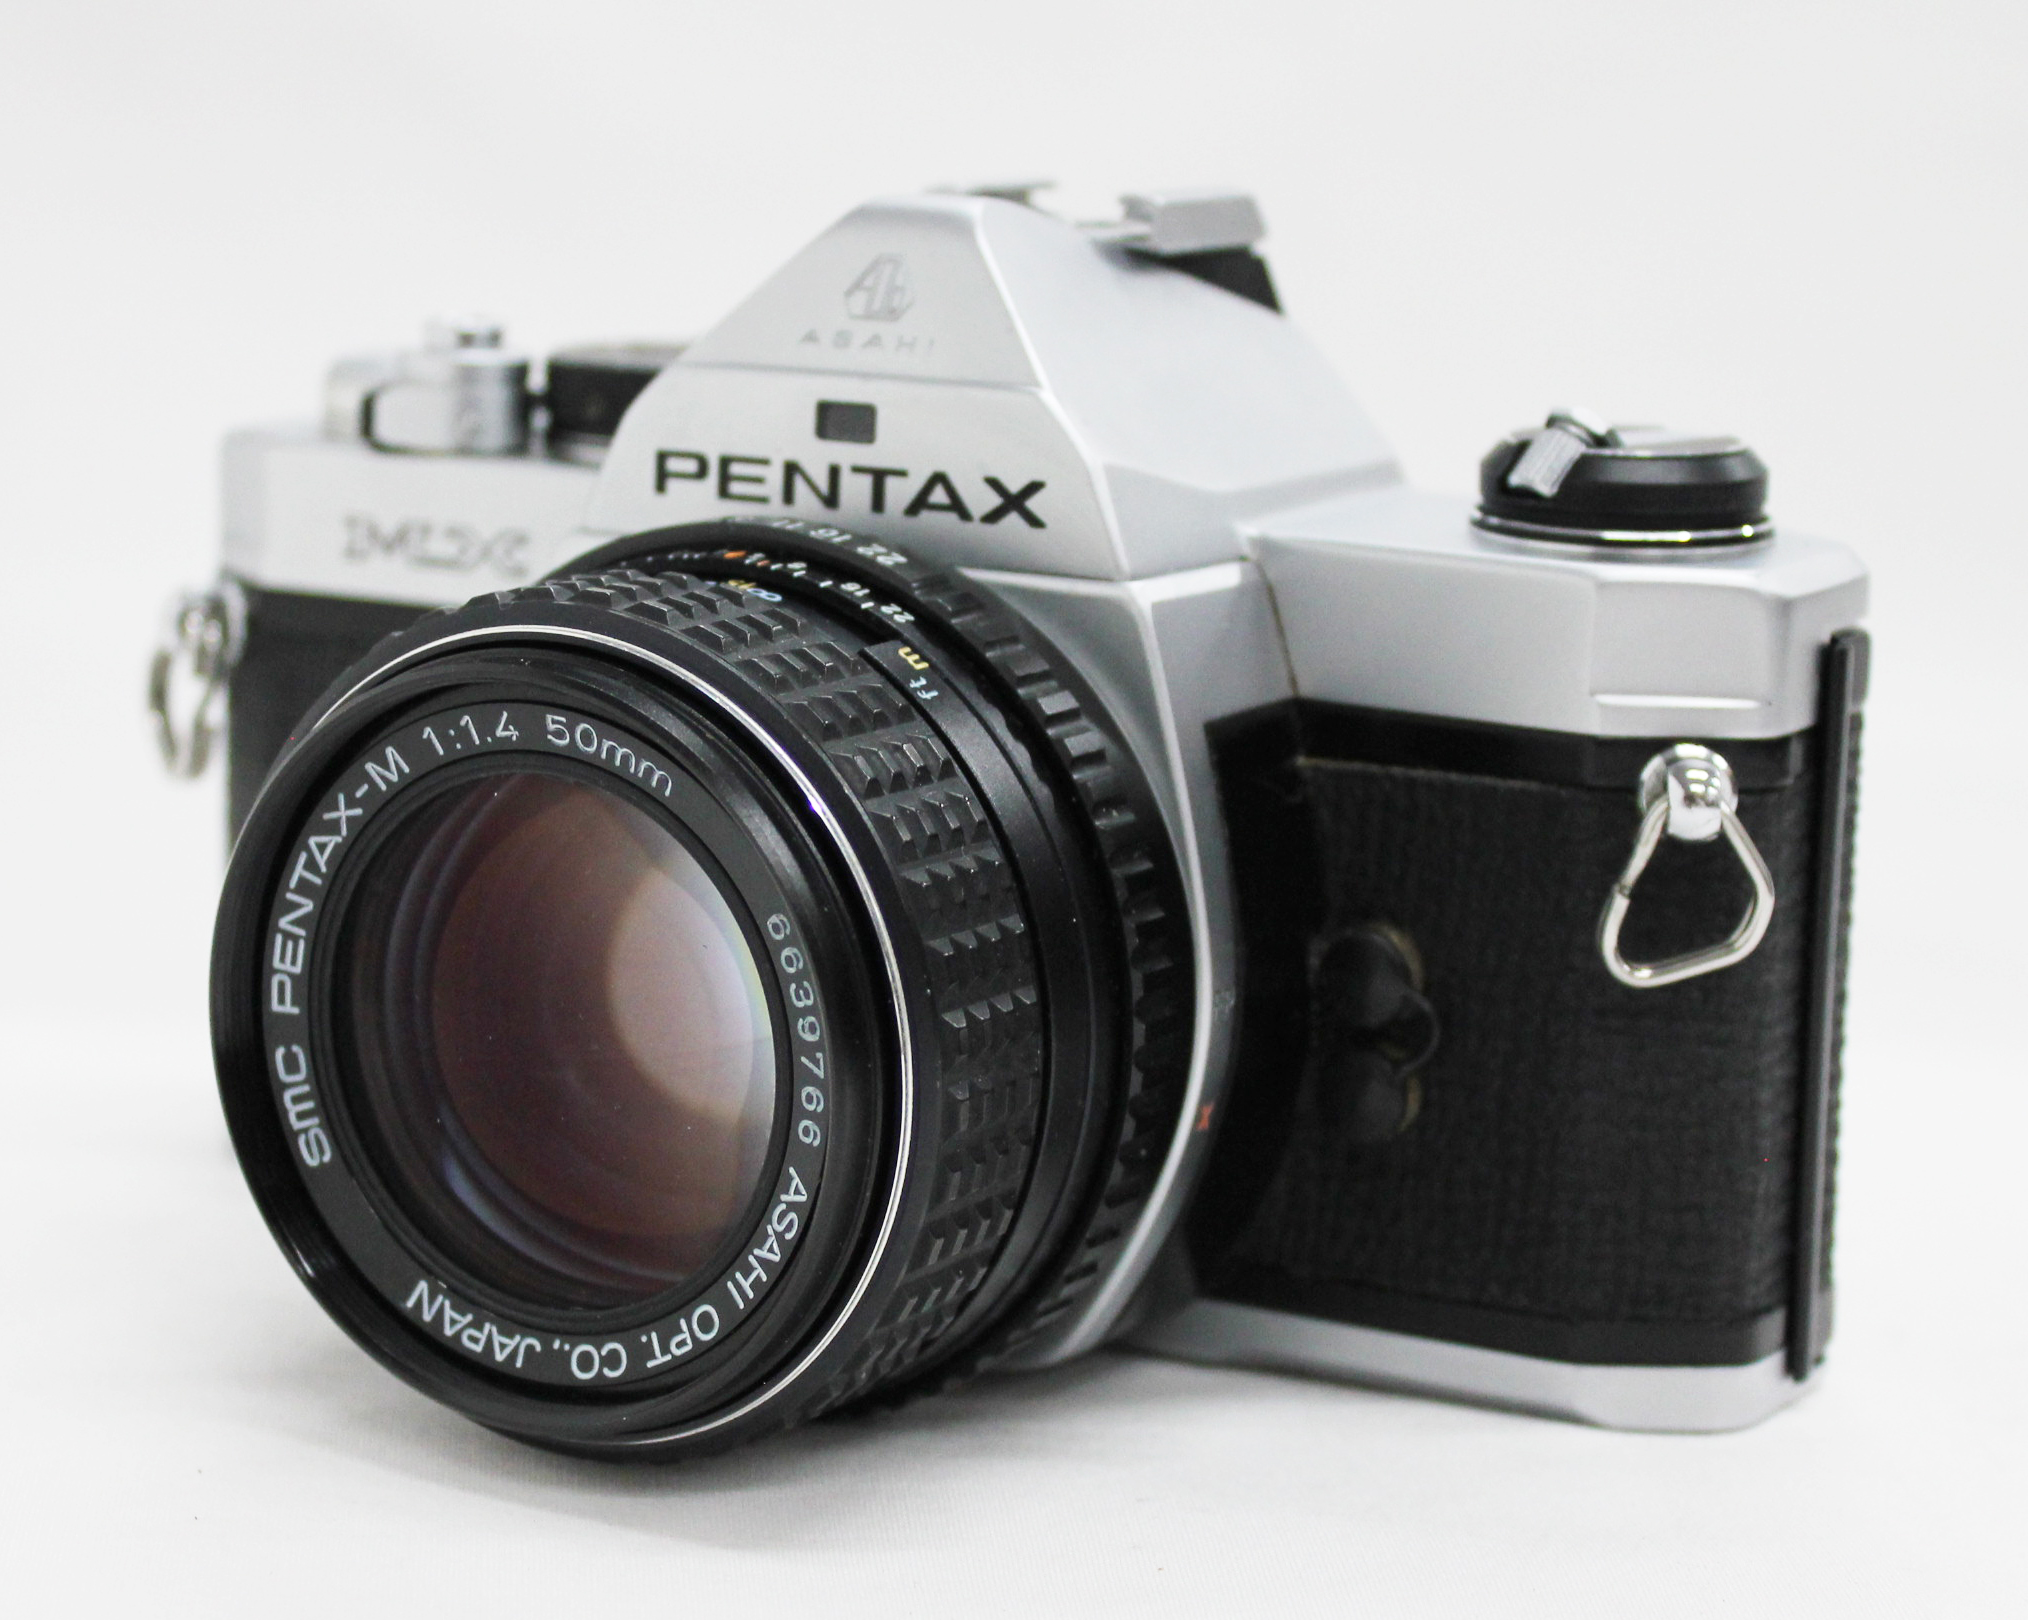 Japan Used Camera Shop | [Excellent++++] Pentax MX SLR 35mm Film Camera with SMC Pentax-M 50mm F/1.4 from Japan